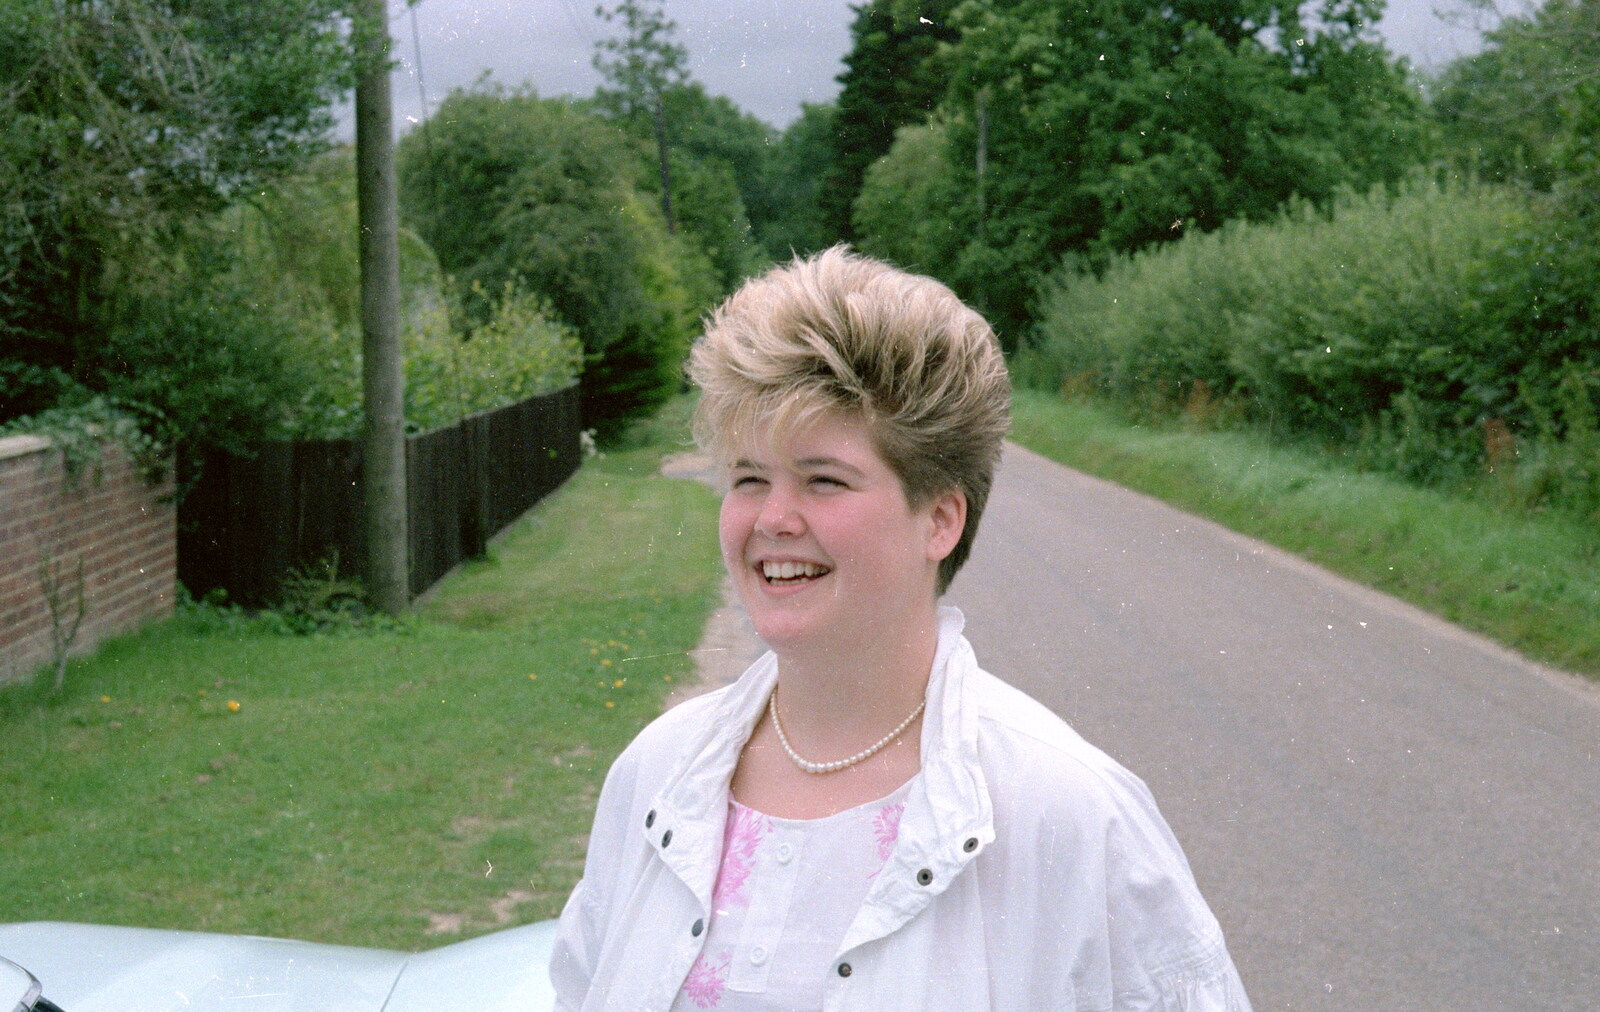 Carol Vass on Middle Road in Tiptoe from The Last Day of Term, and Leaving New Milton, Hampshire - 18th September 1985